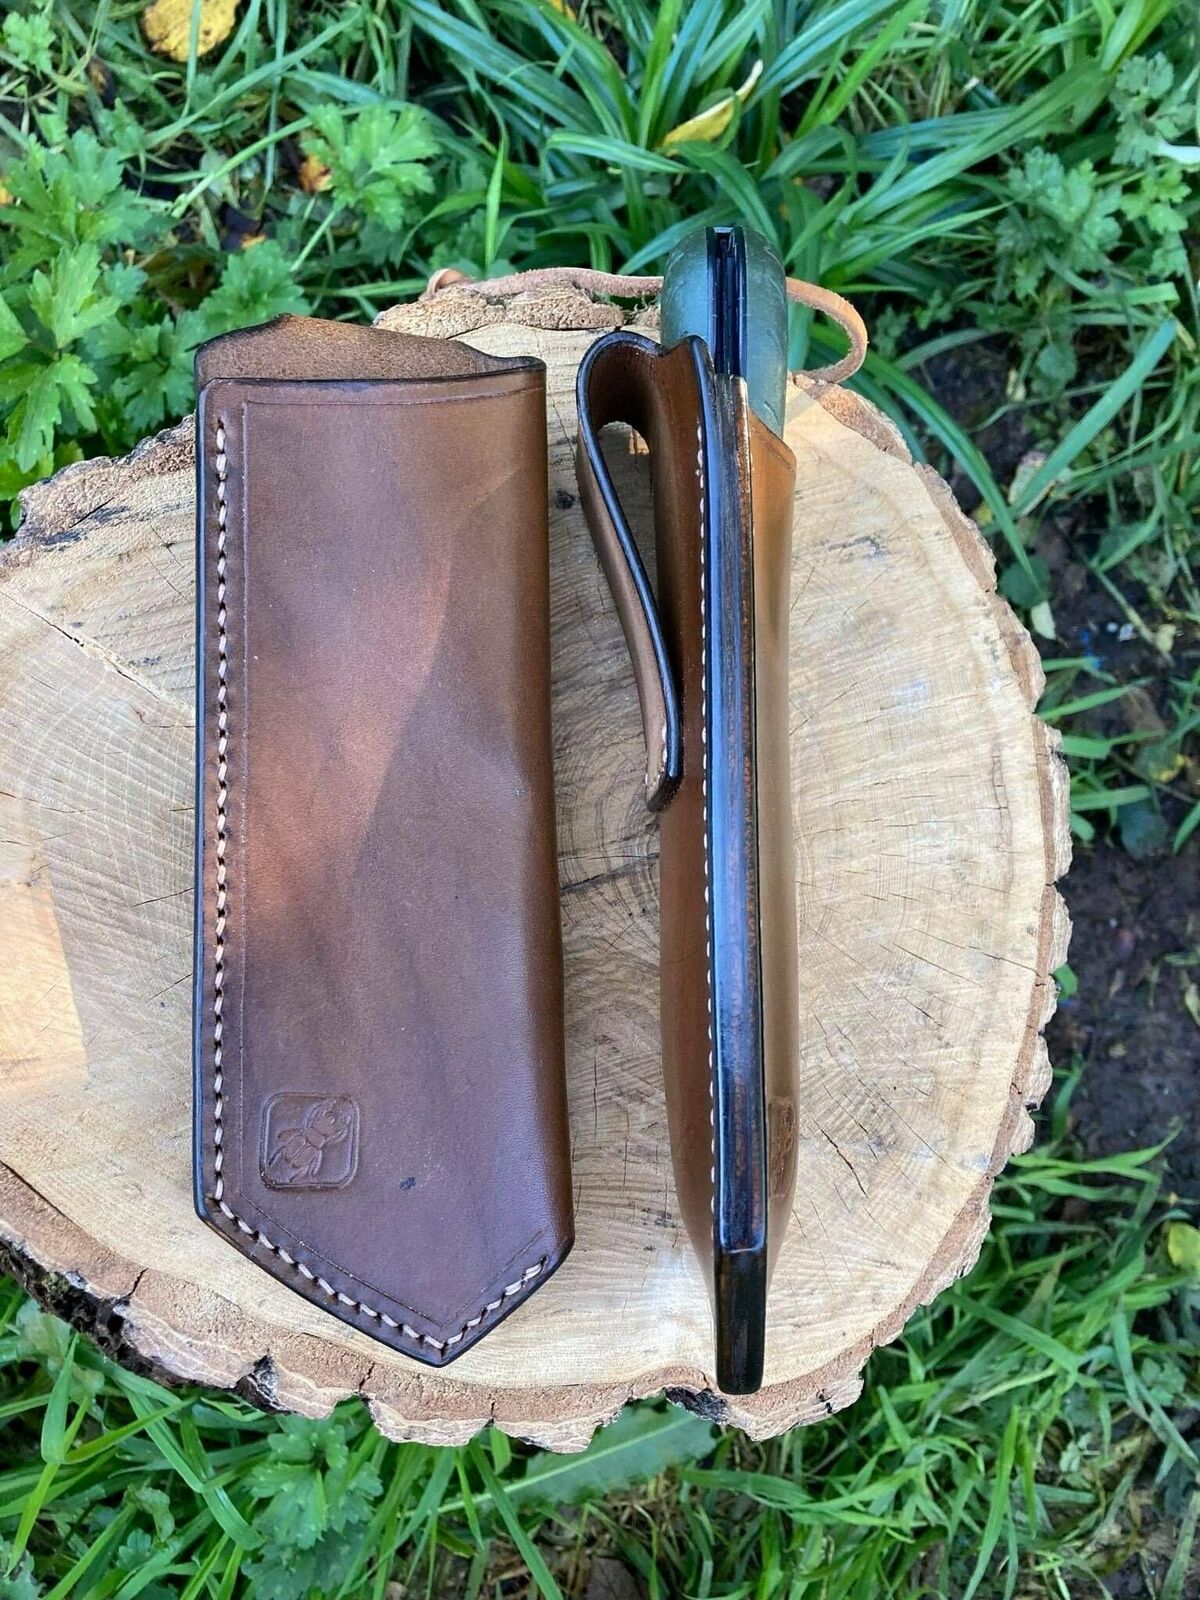 Handcrafted leather Laplander saw sheath IN STOCK